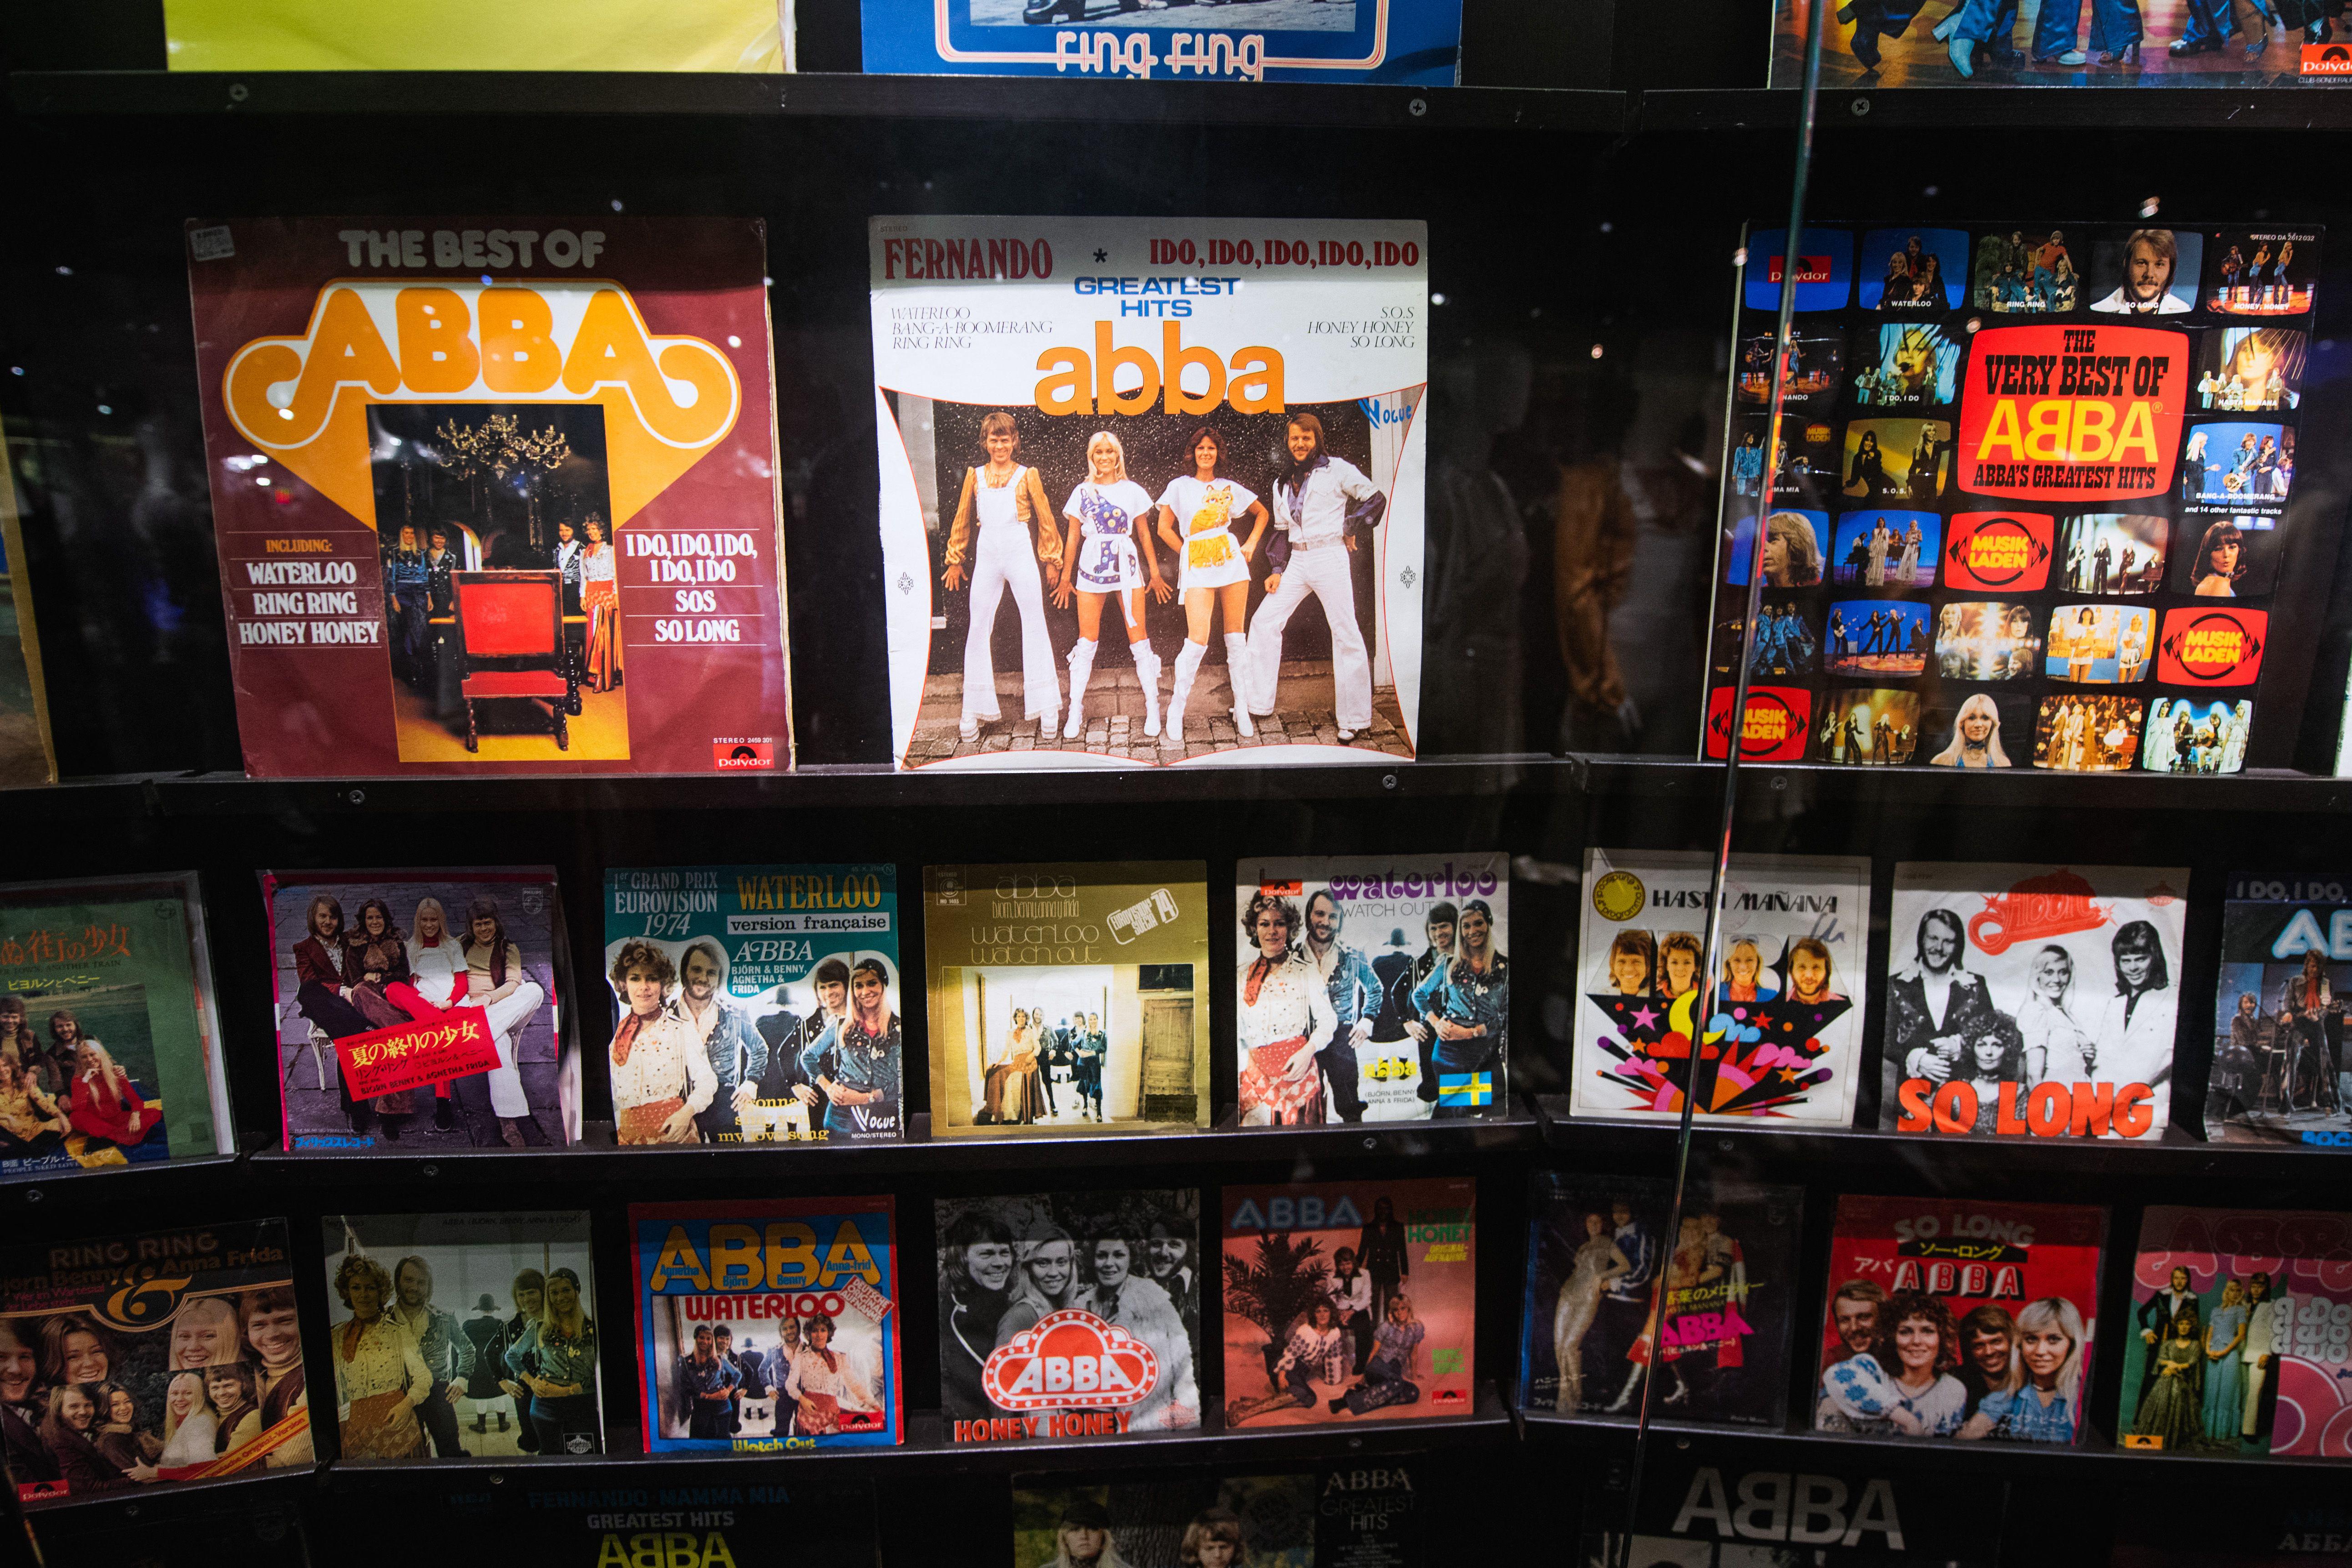 Swedish music band ABBA's international releases are displayed at the ABBA museum in Stockholm, Sweden on November 5, 2021. - ABBA's first album in 40 years, "The Voyage",  was released on November 5, 2021. (Photo by Jonathan NACKSTRAND / AFP) (Photo by JONATHAN NACKSTRAND/AFP via Getty Images)